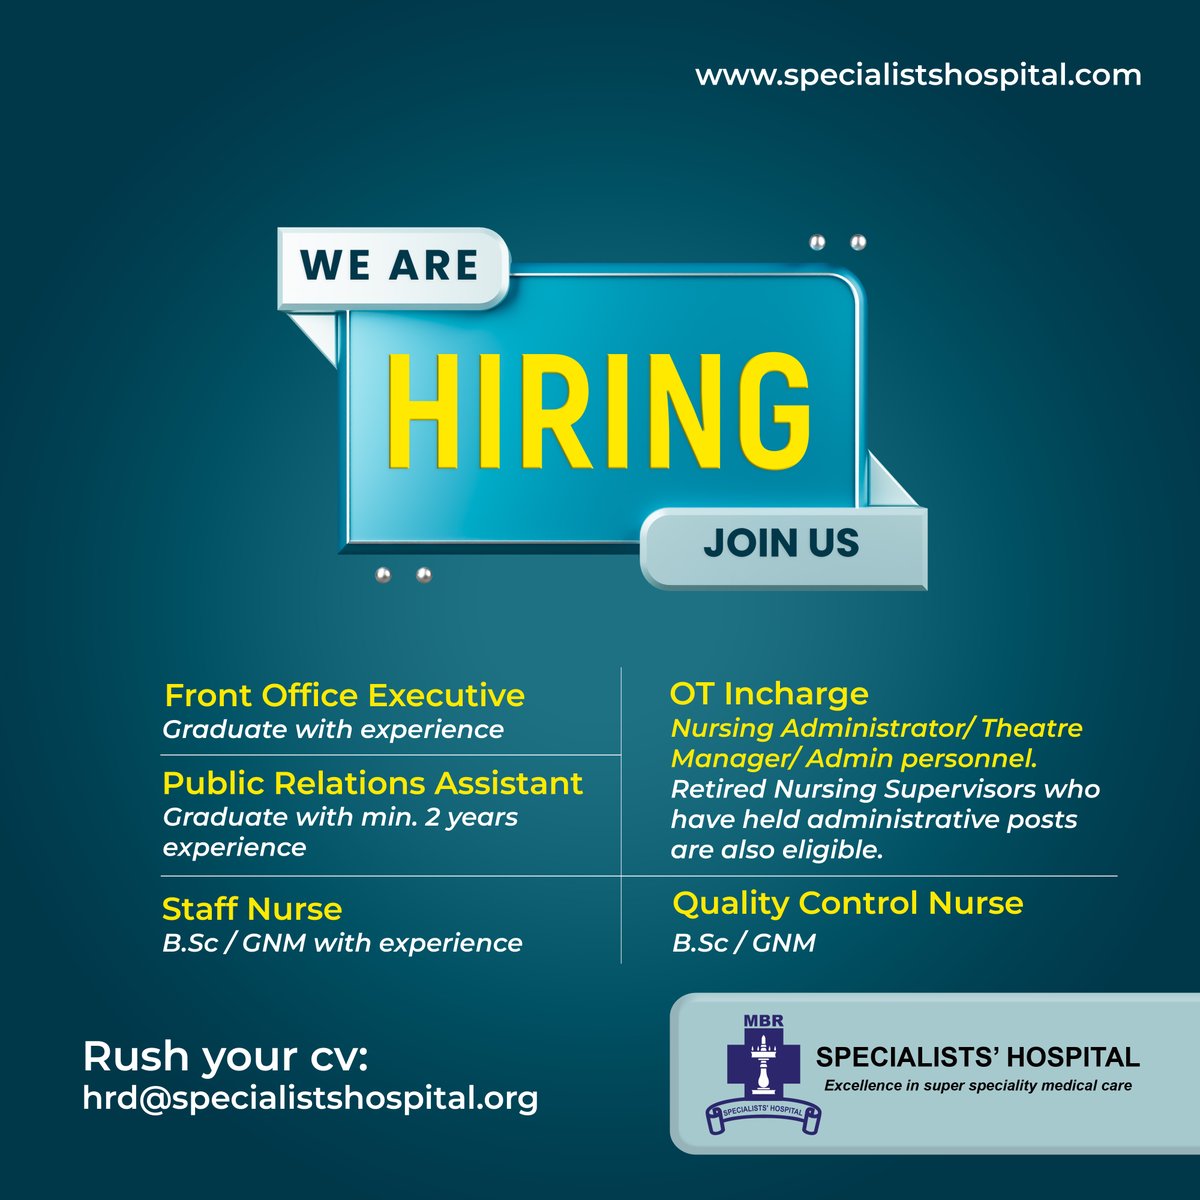 We are expanding our team and now hiring

Send your resume to: hrd@specialistshospital.org

#besthospital #ernakulam #specialists40years #specialistshospitalkochi #kochi #FreeMedicalCamp #recruitment #hiring #nowhiring #vacancy #nursingcareers #staffnursejobs #nursingassistance